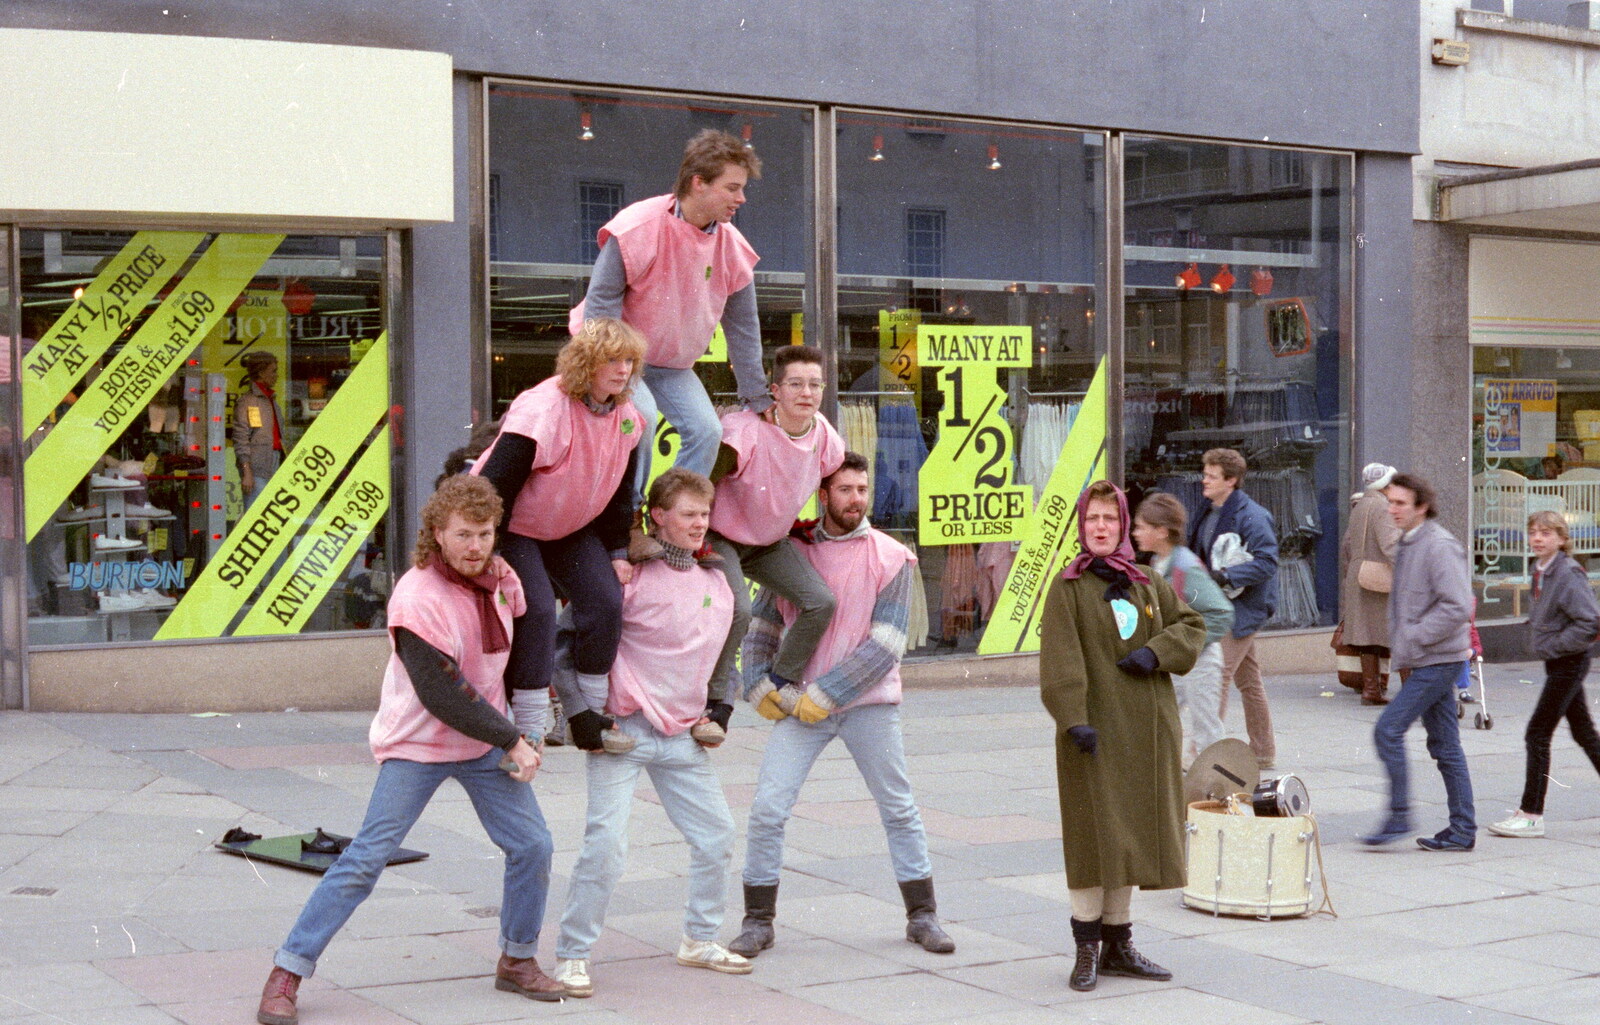 The human pyramid from Uni: A Van Gogh Grant Cuts Protest, Plymouth, Devon - 1st March 1986